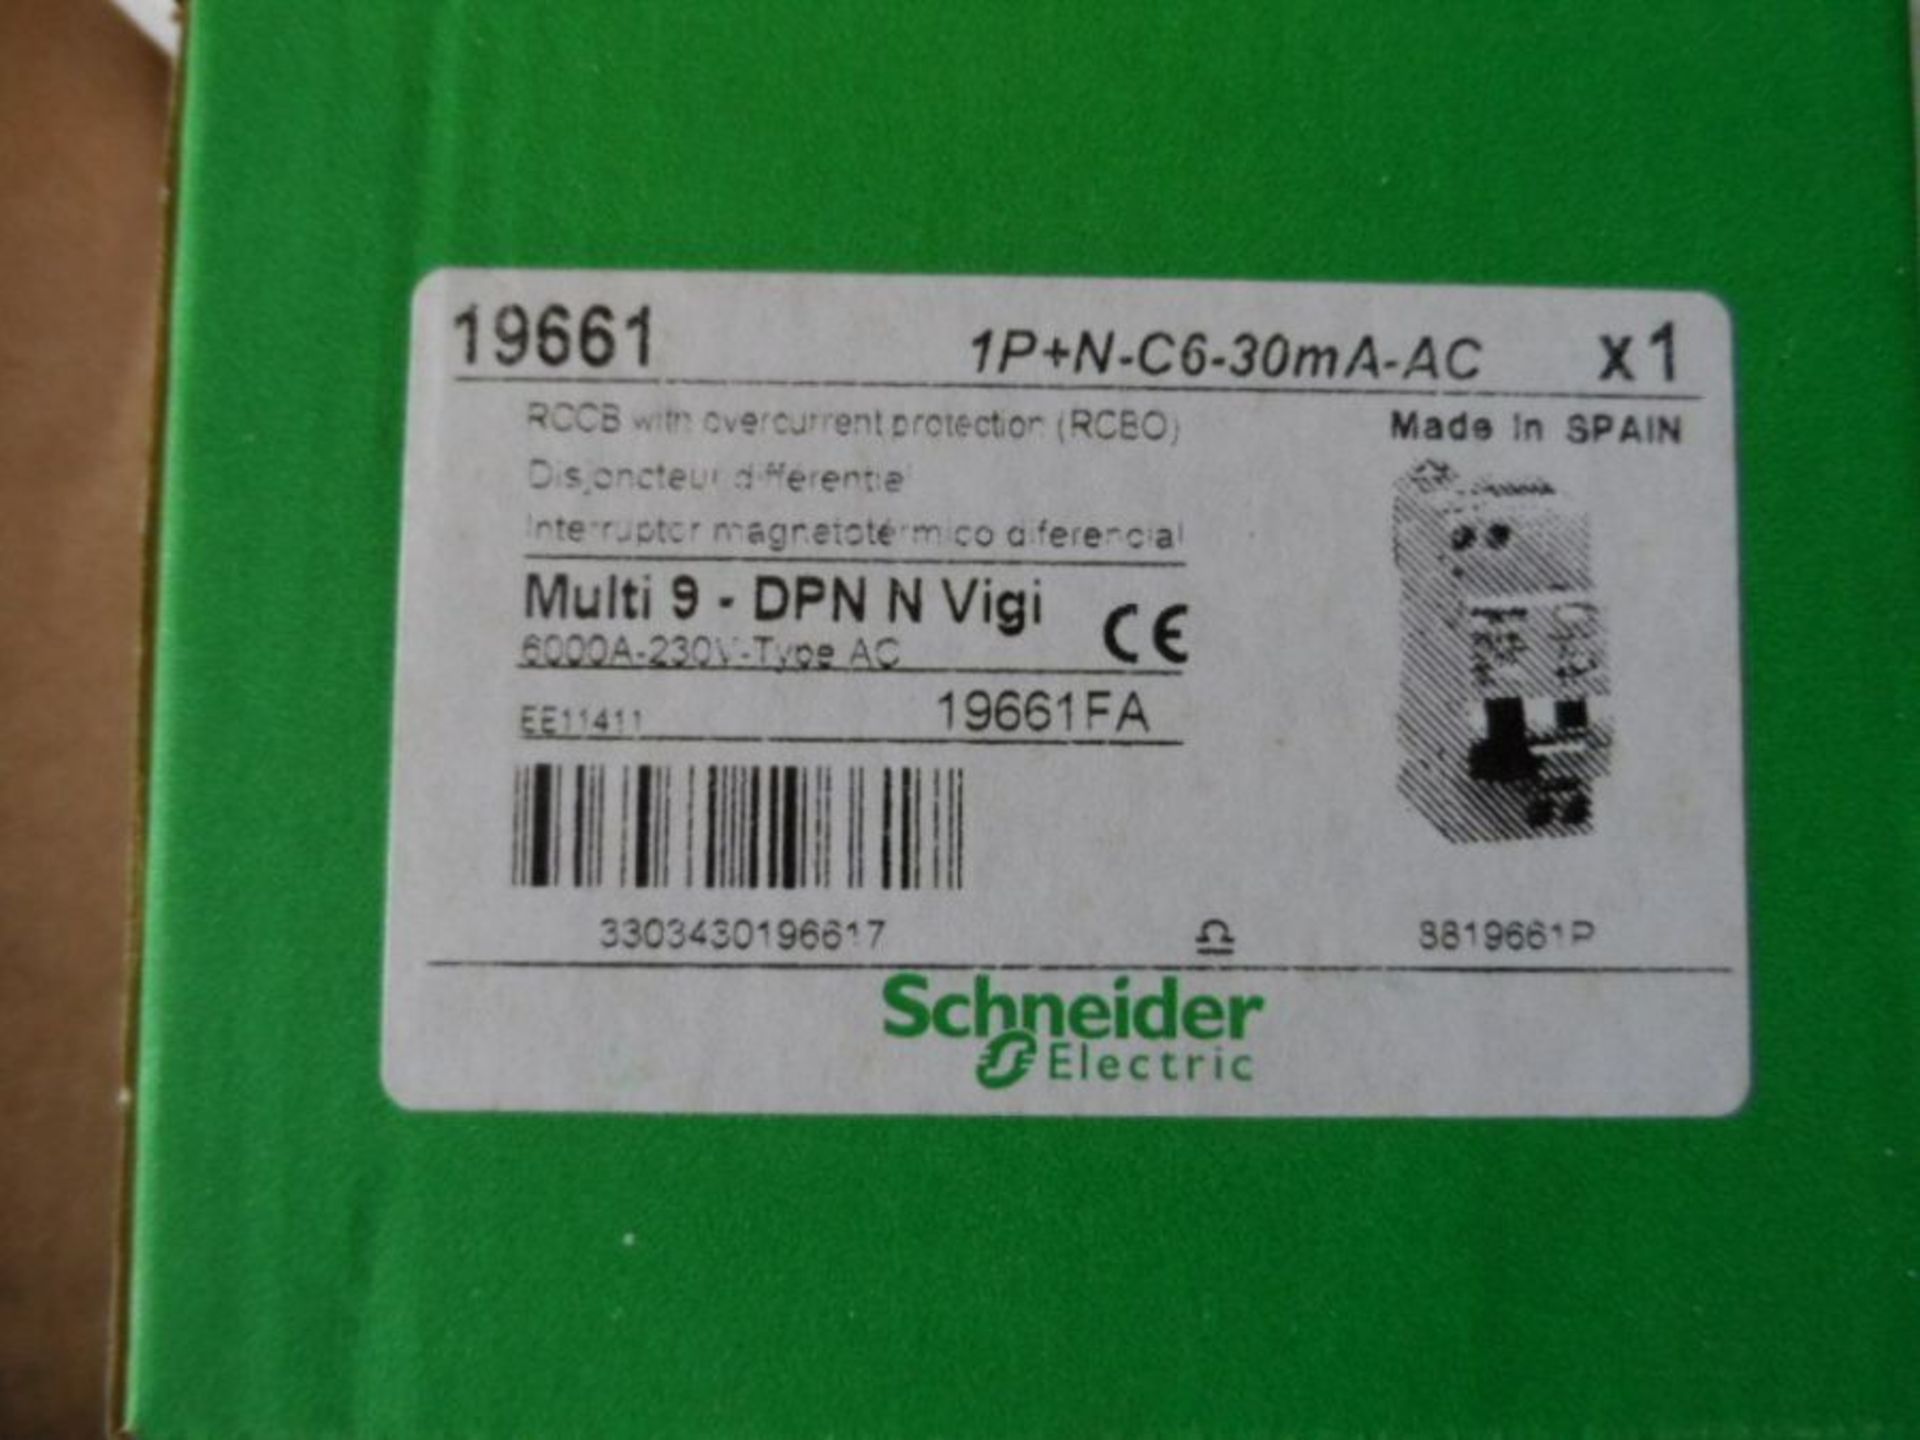 20 x Schneider 1+N Pole Type C RCBO Circuit Breaker Overload Protection 6A 2450075 - Image 2 of 4